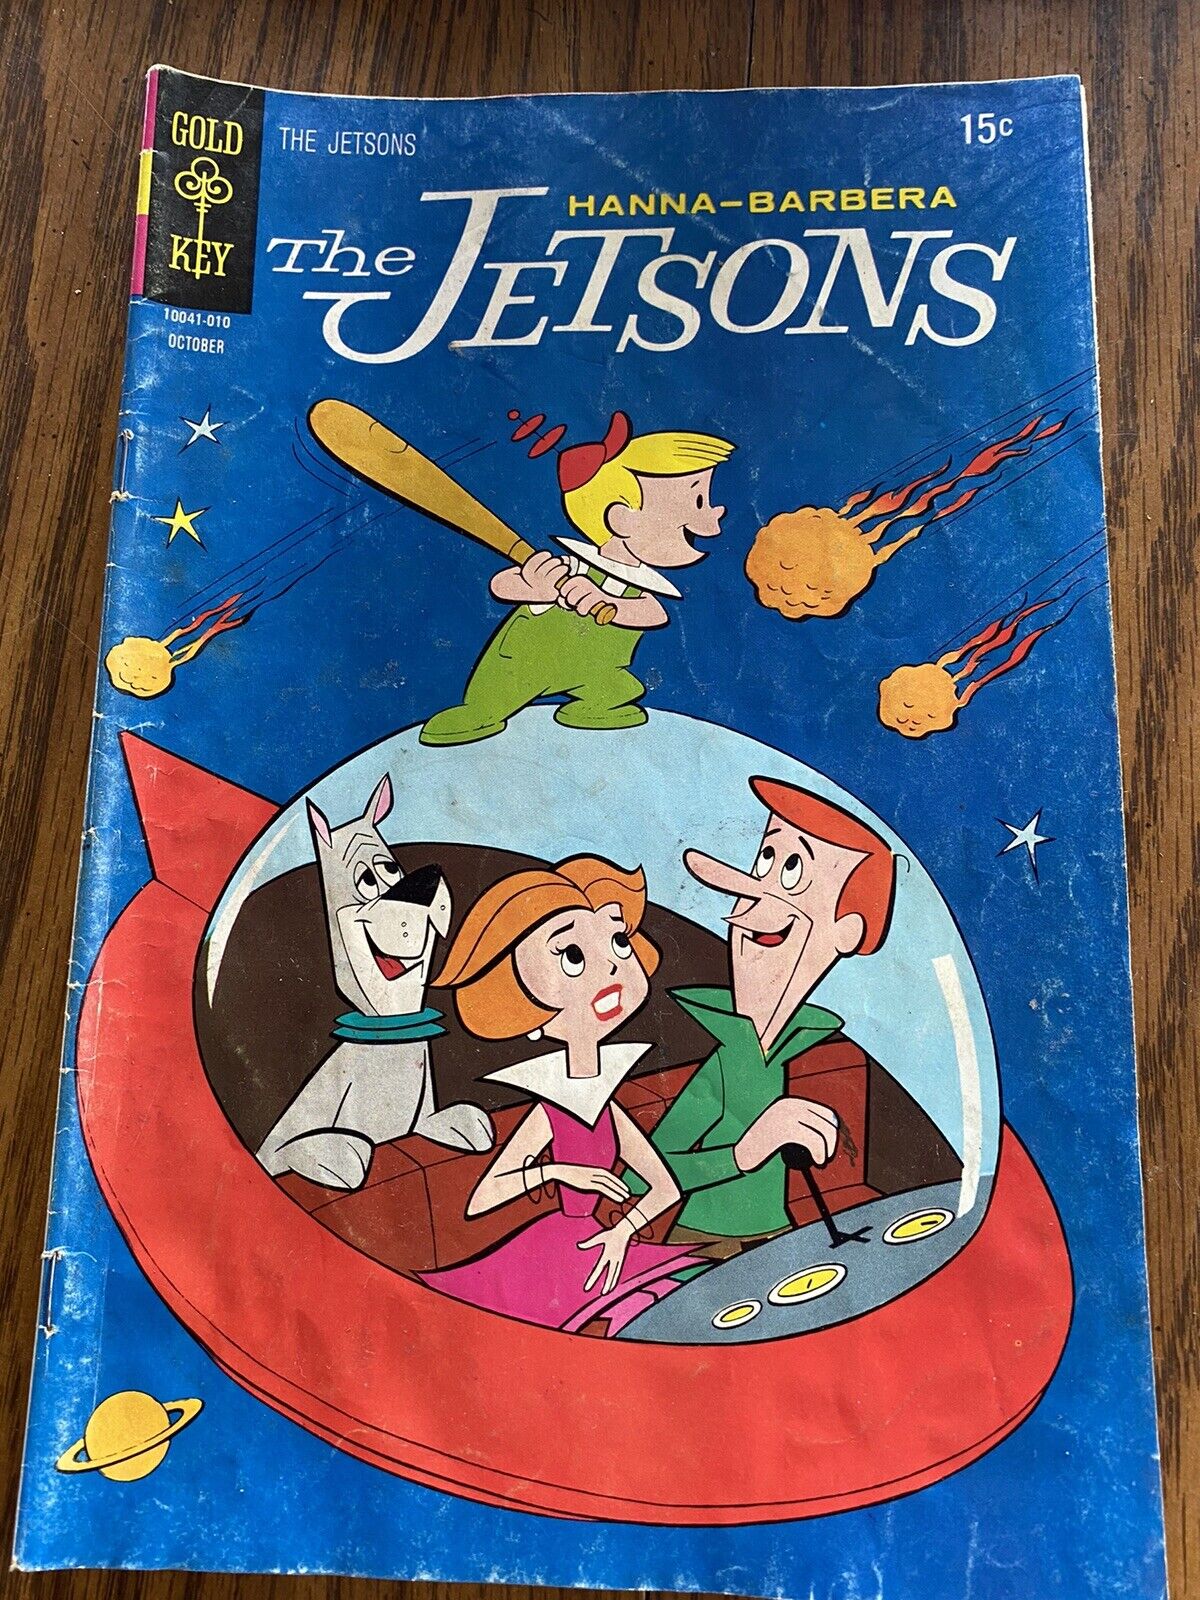 The Jetsons Comic Book Gold Key No. 36 October 1970